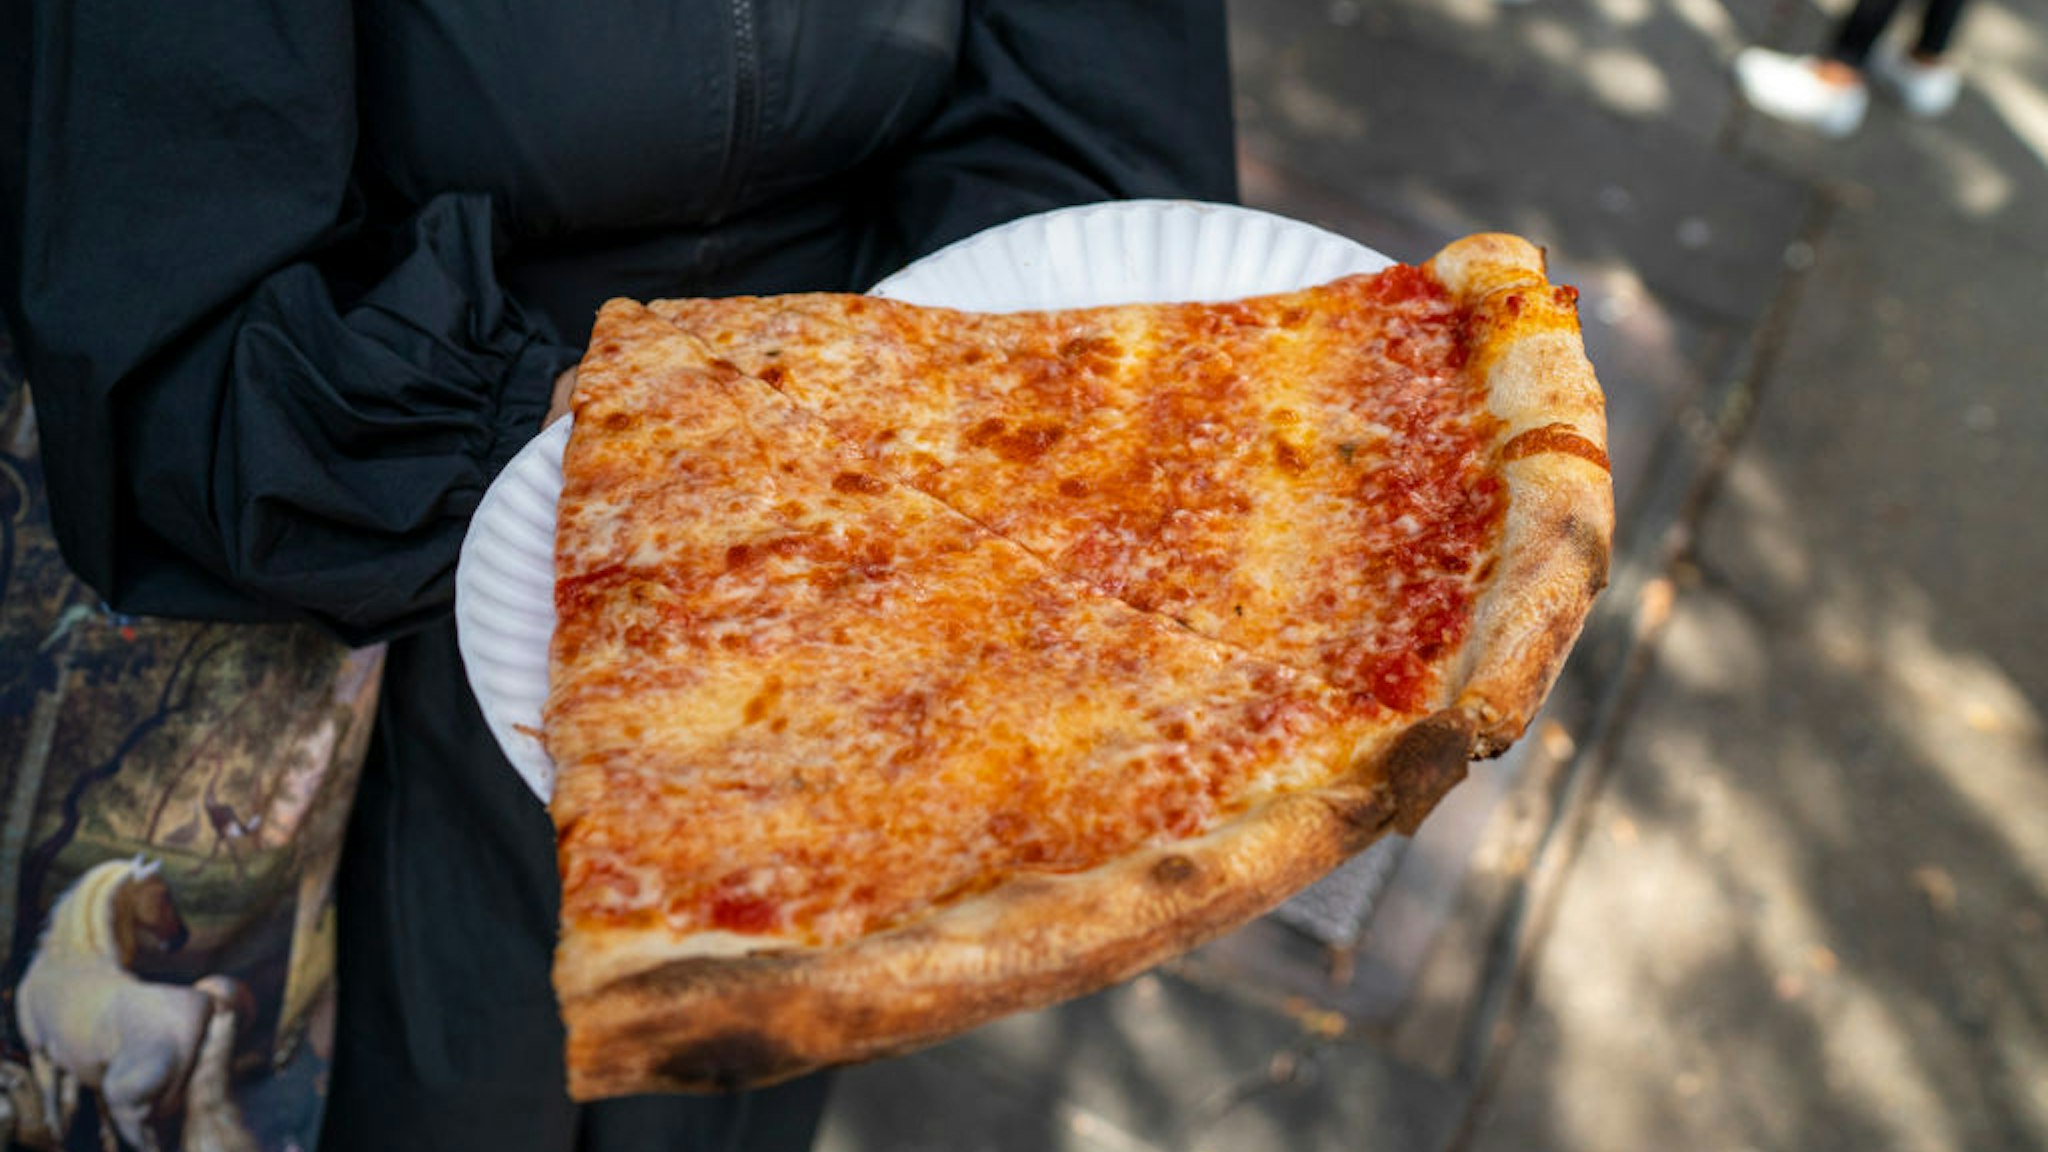 NEW YORK, NY - OCTOBER 23: A tourist carries freshly made pizza slices from Joe's Pizza on Carmine Street October 23, 2021 in New York City. Over 500,000 pizzas are sold everyday in New York City. (Photo by Robert Nickelsberg/Getty Images)